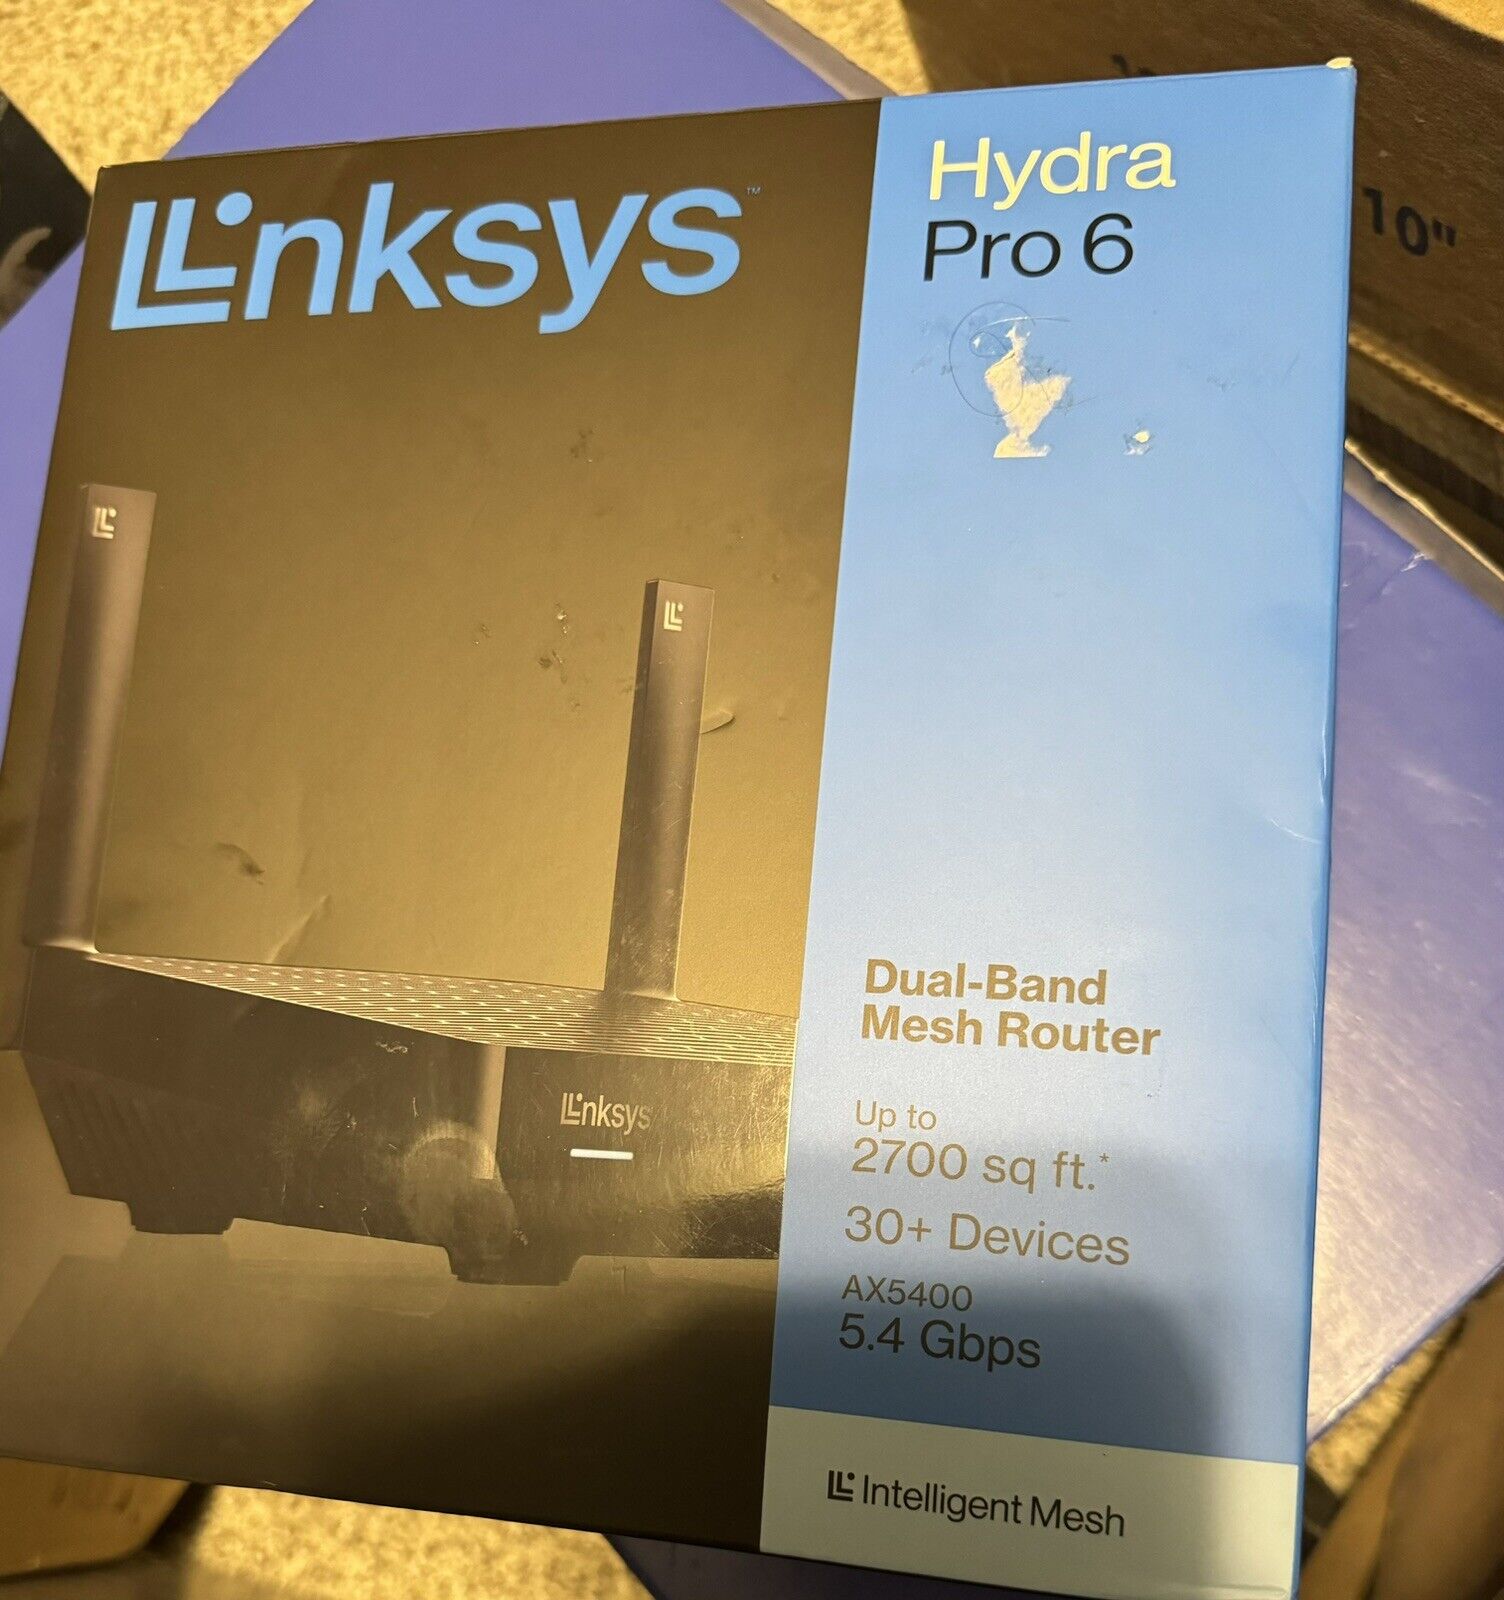 Linksys Hydra Pro 6 Dual-Band Mesh WiFi 6 Router MR5500 AX5400 5.4 Gbps OPEN BOX